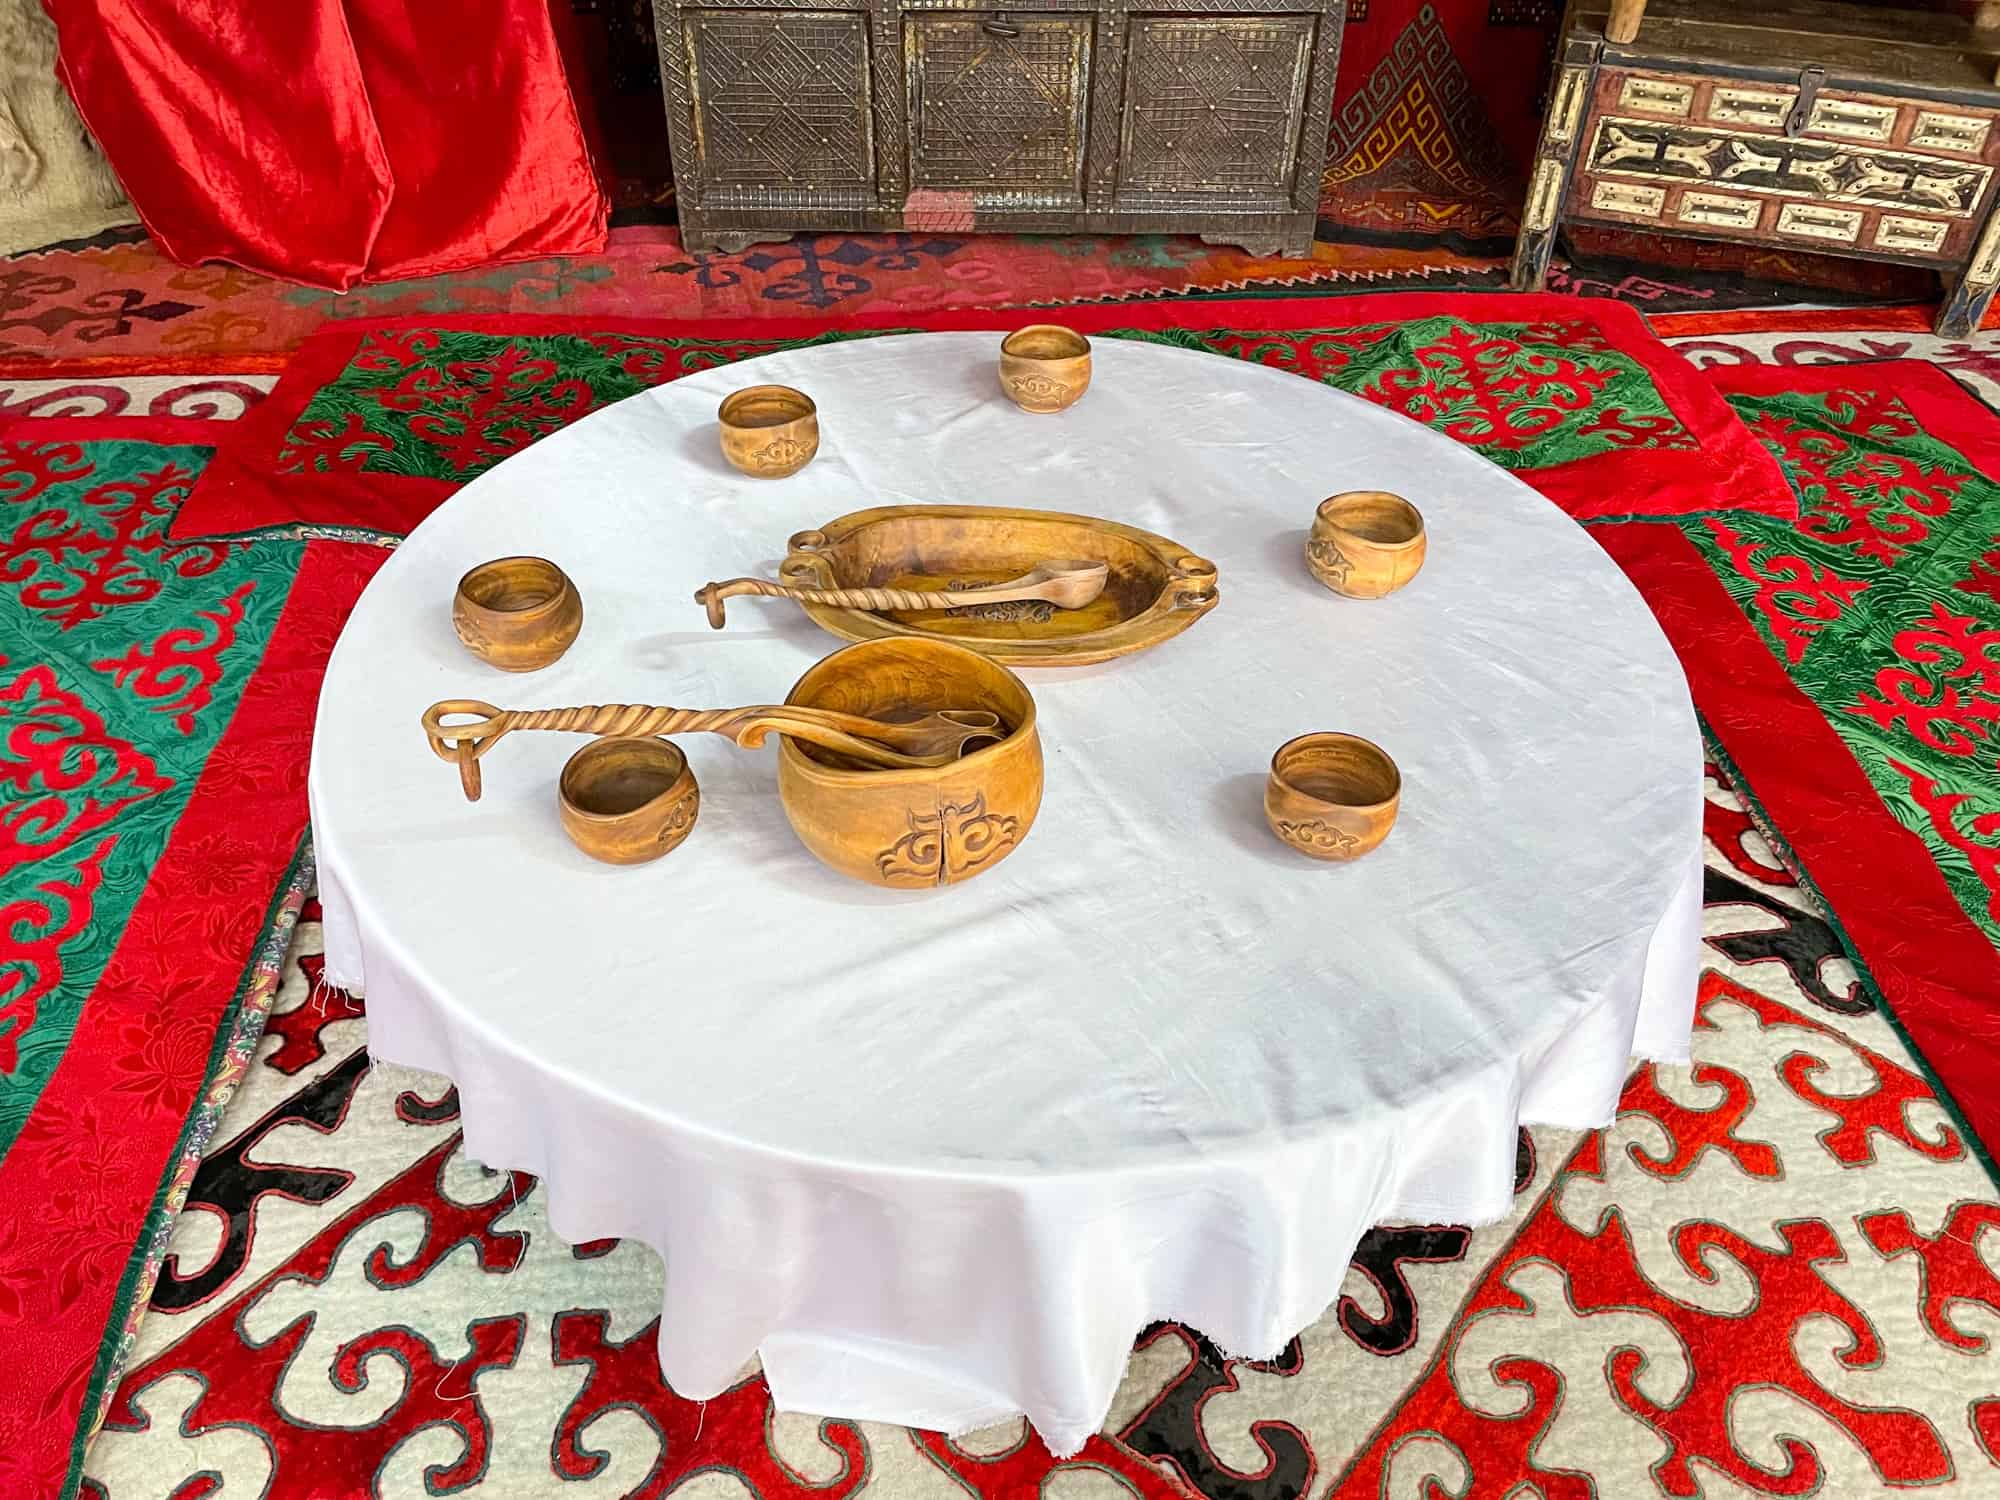 Kazakhstan Food - traditional wooden pots and serving platters on a low table